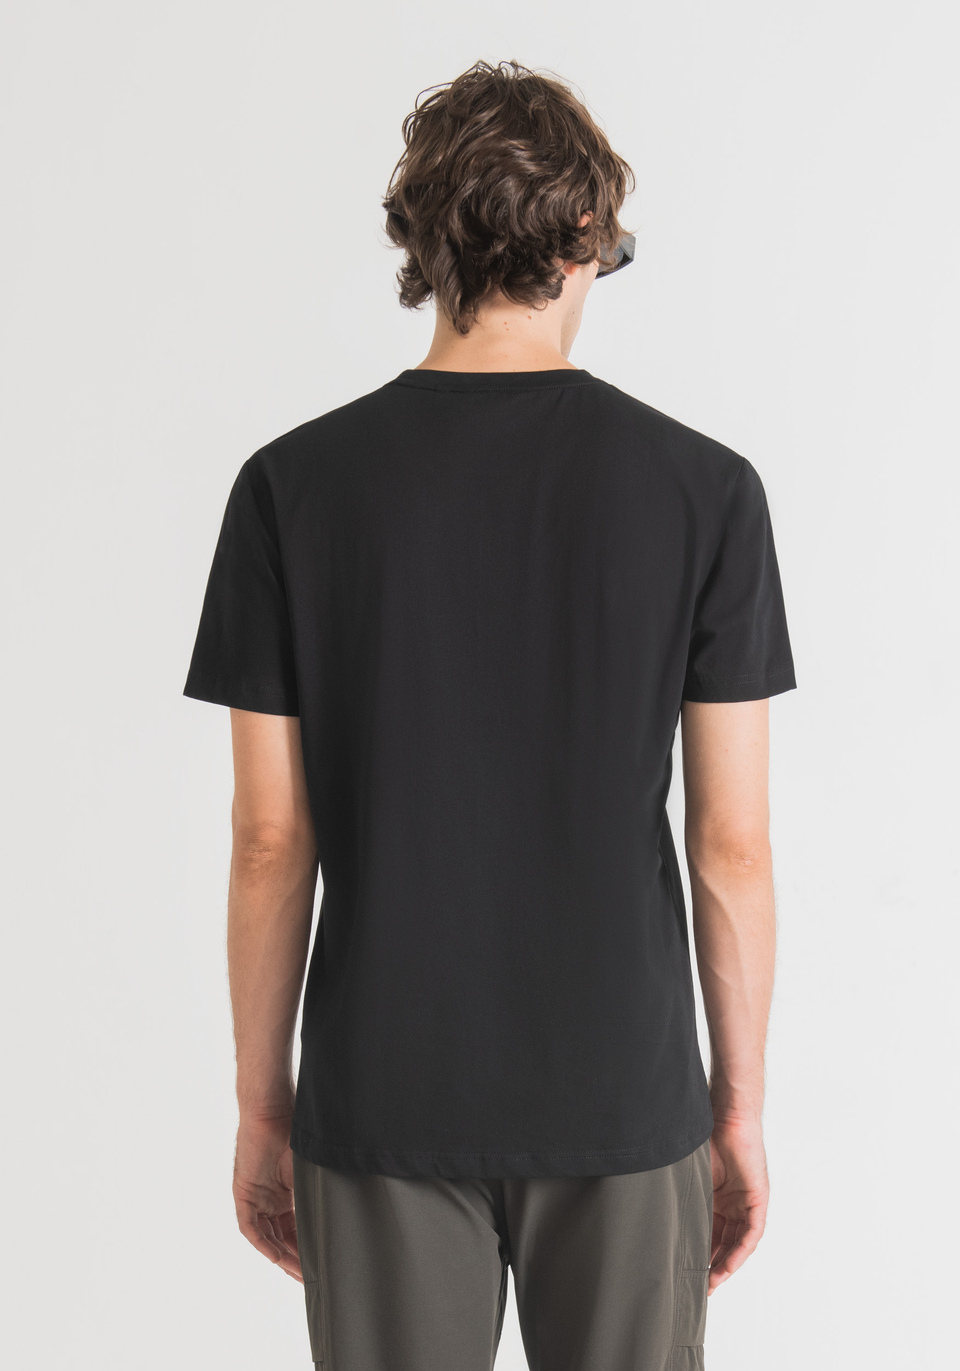 REGULAR FIT T-SHIRT IN PURE COTTON JERSEY WITH CONTRAST DETAILS - Antony Morato Online Shop